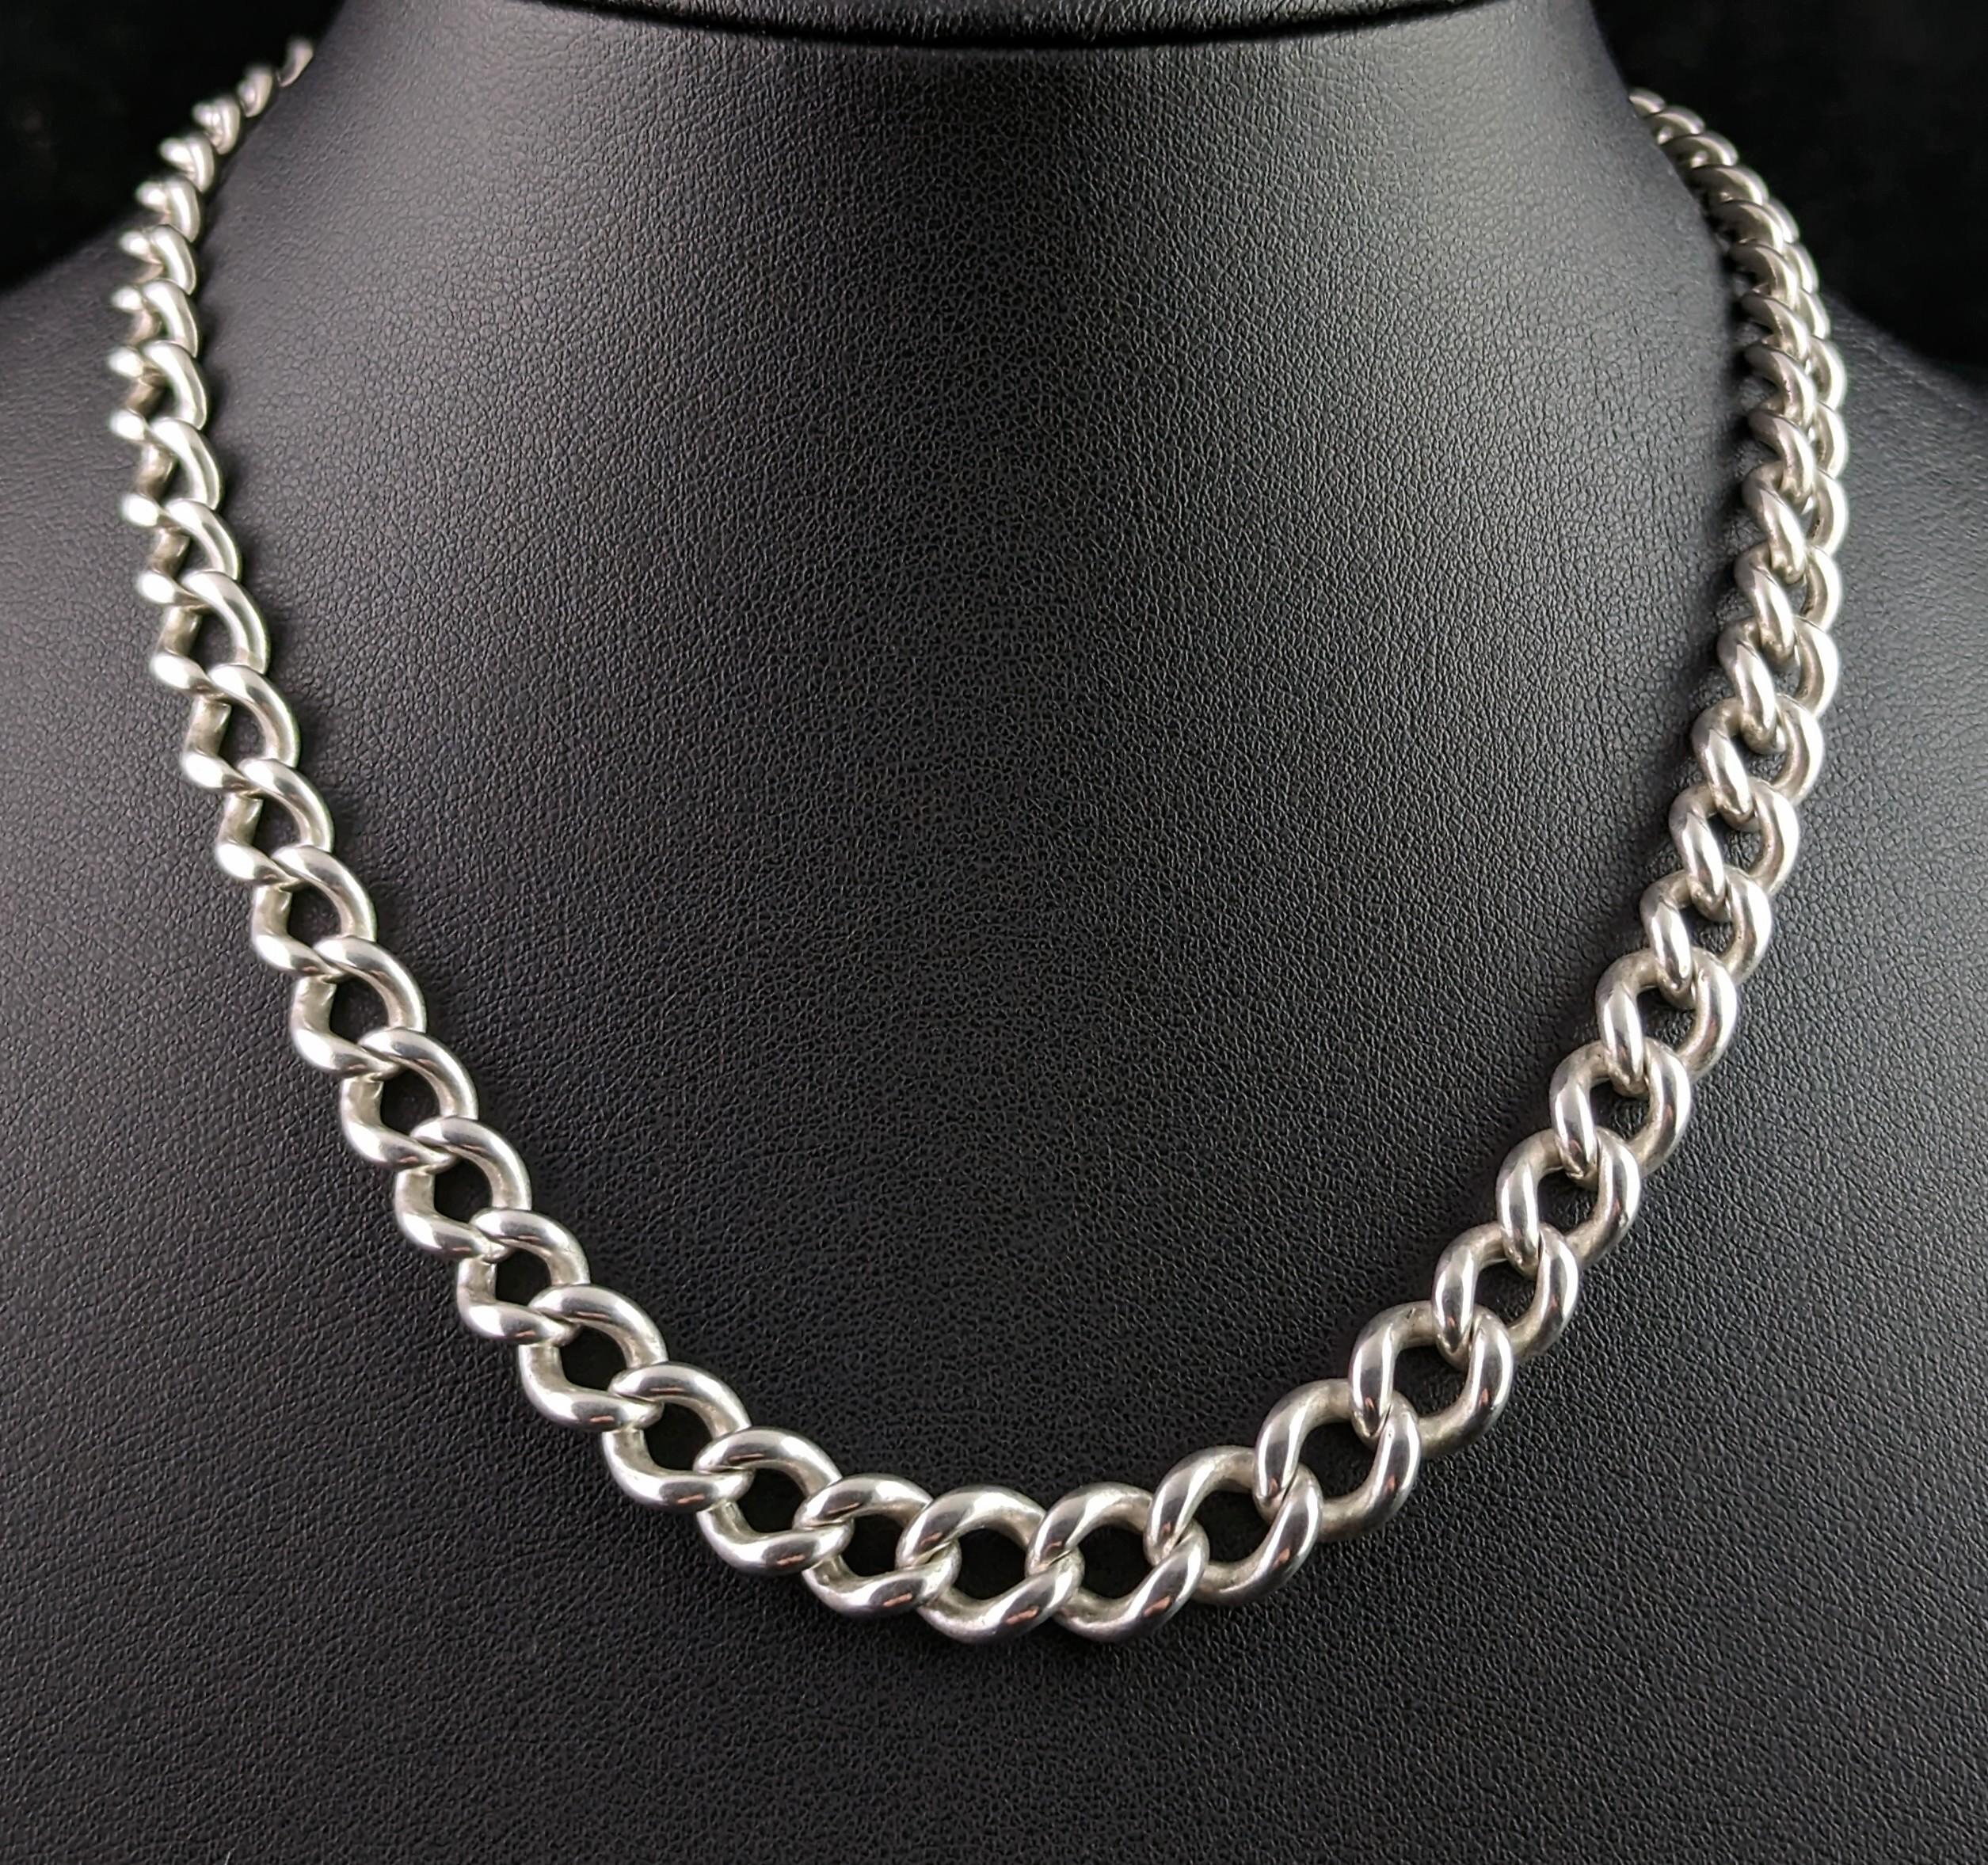 You can't help but fall in love with this handsome antique Albert chain.

It is a sterling silver chain with a graduating curb link with a dog clip fastener to one end with a T bar and a jump ring to the other end.

Each link is stamped with the